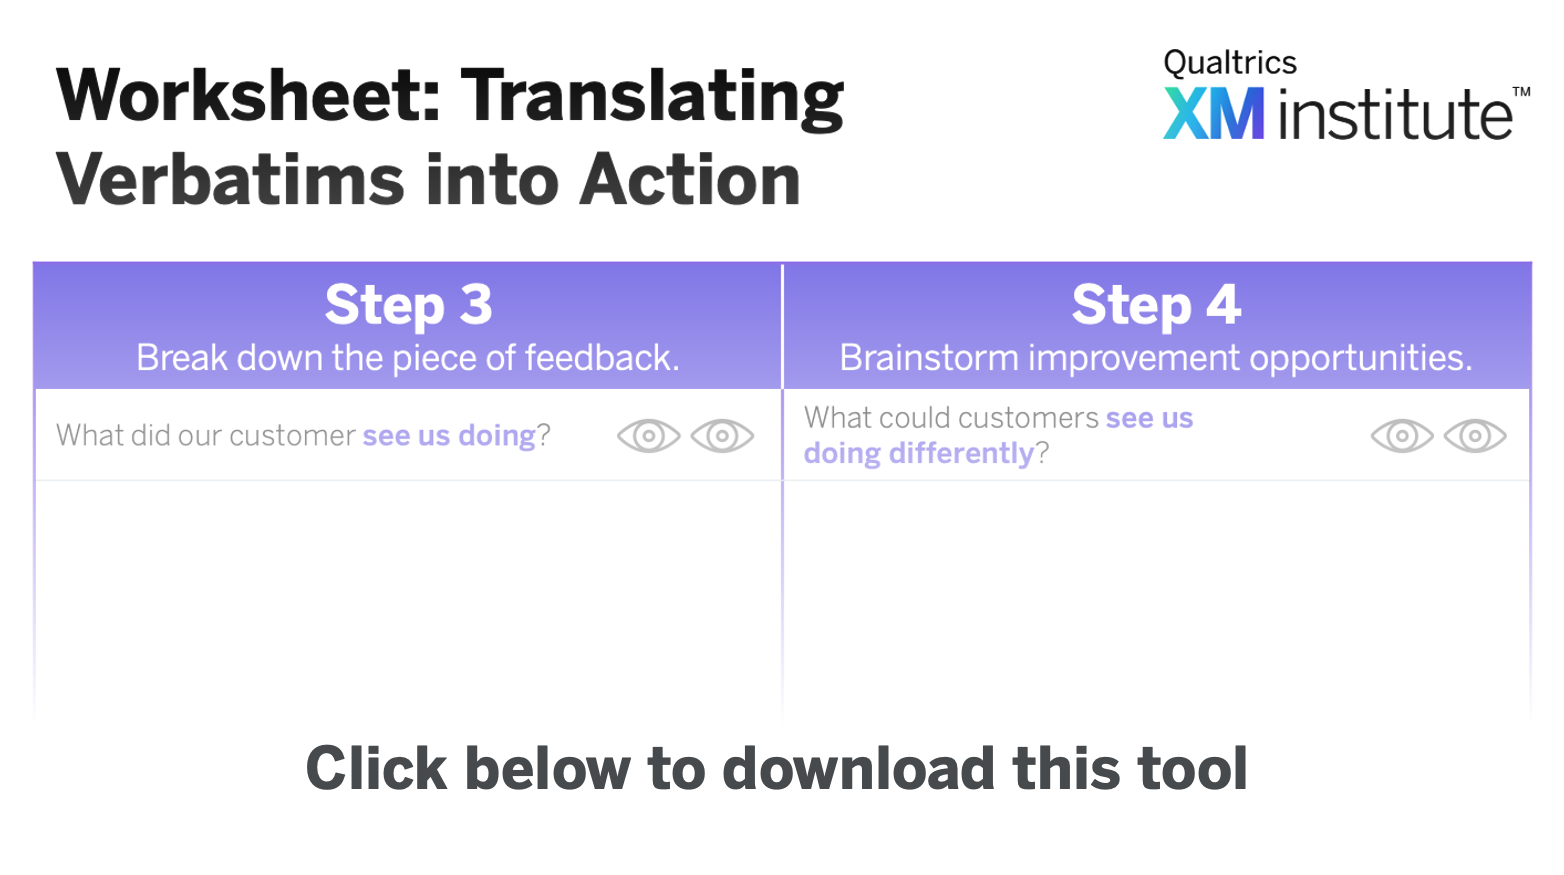 Download Image - Translating Verbatims into Action